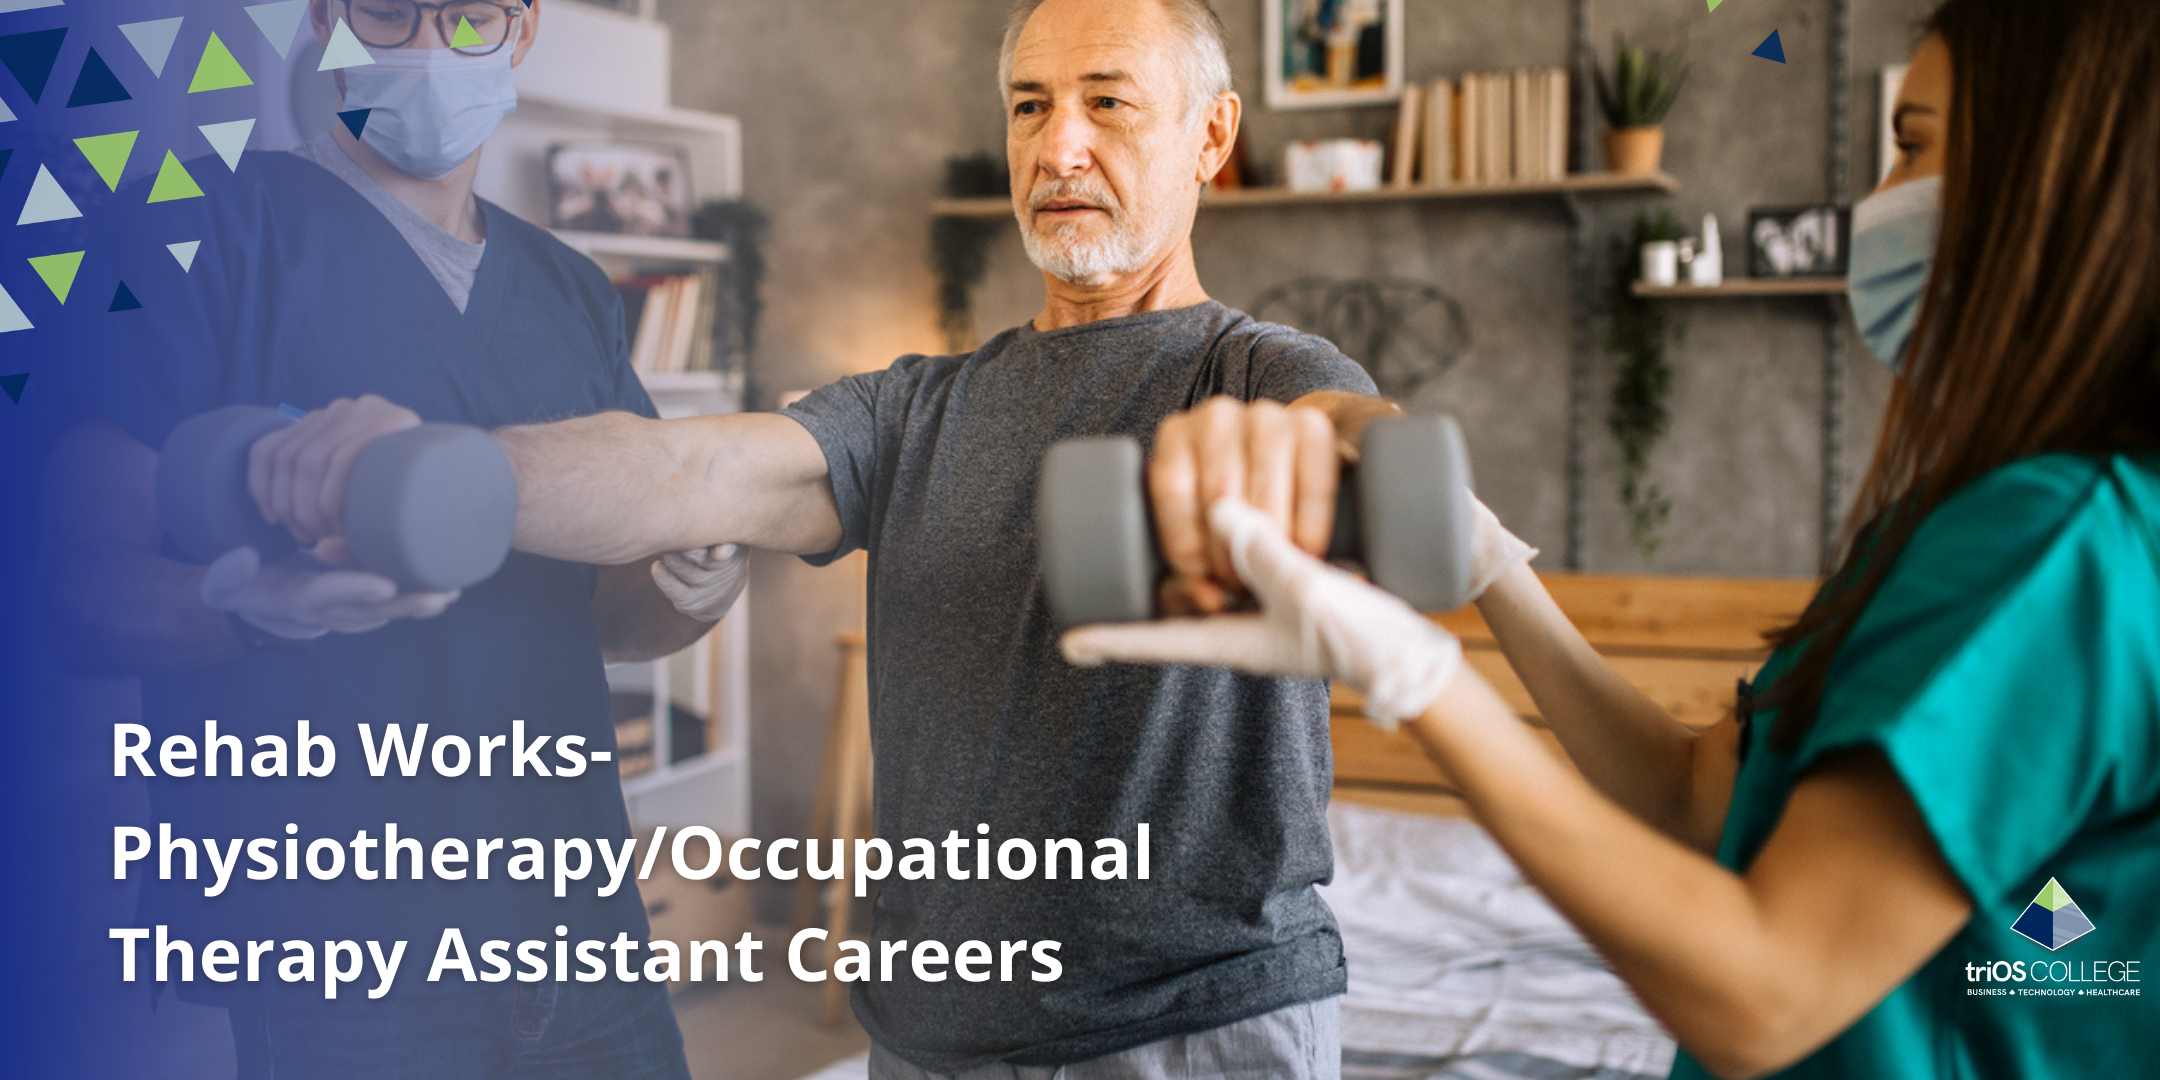 Rehab Works- Physiotherapy/Occupational Therapy Assistant Careers featured image